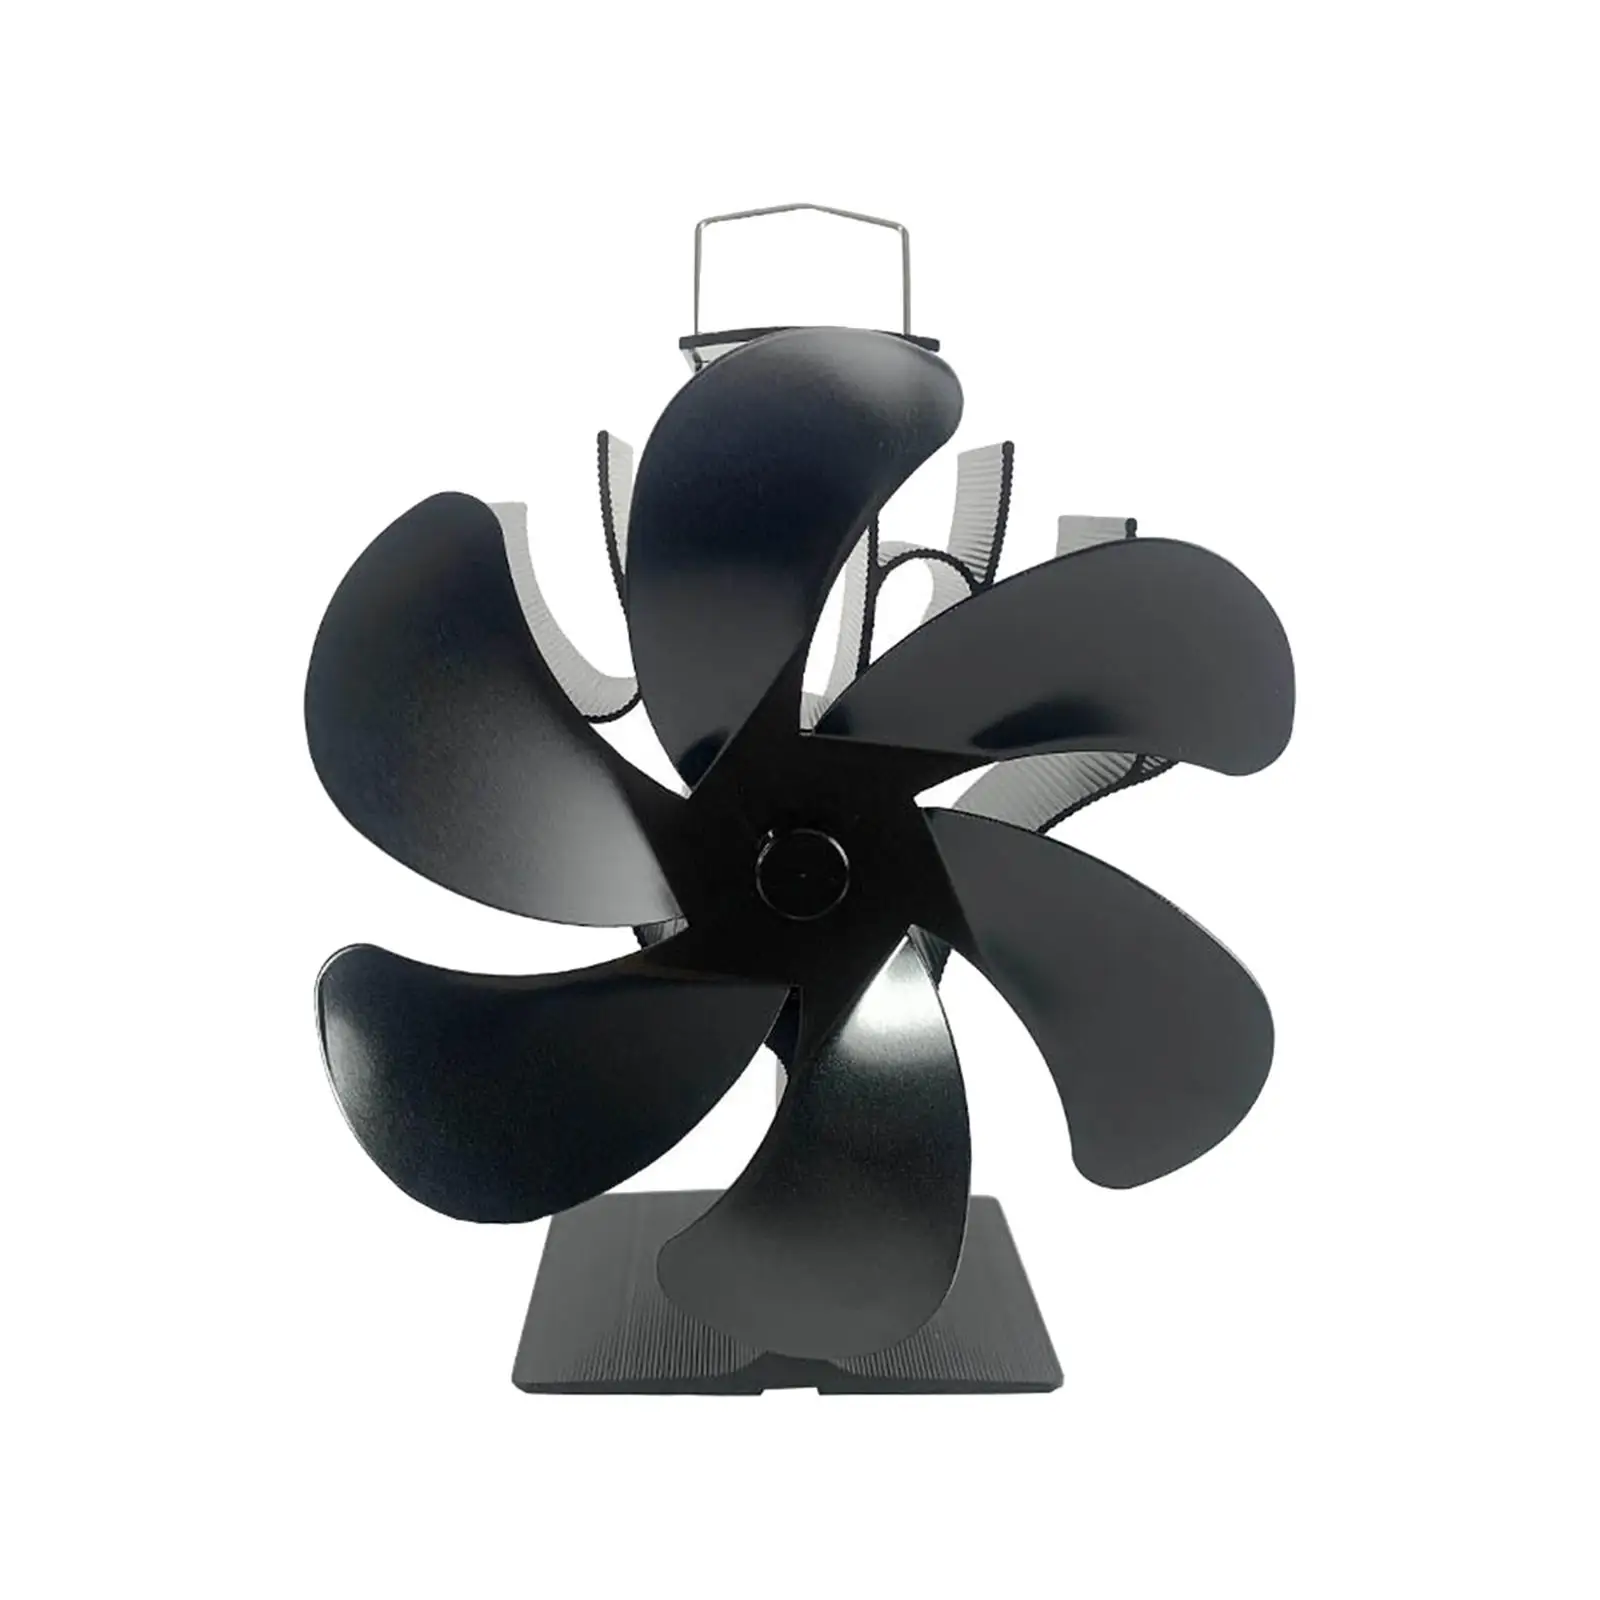 Heat Powered Fireplace Fan Powered Stove Fan for Winter Wood Burning Stove Log Burner Fireplace Wood Stove Accessories